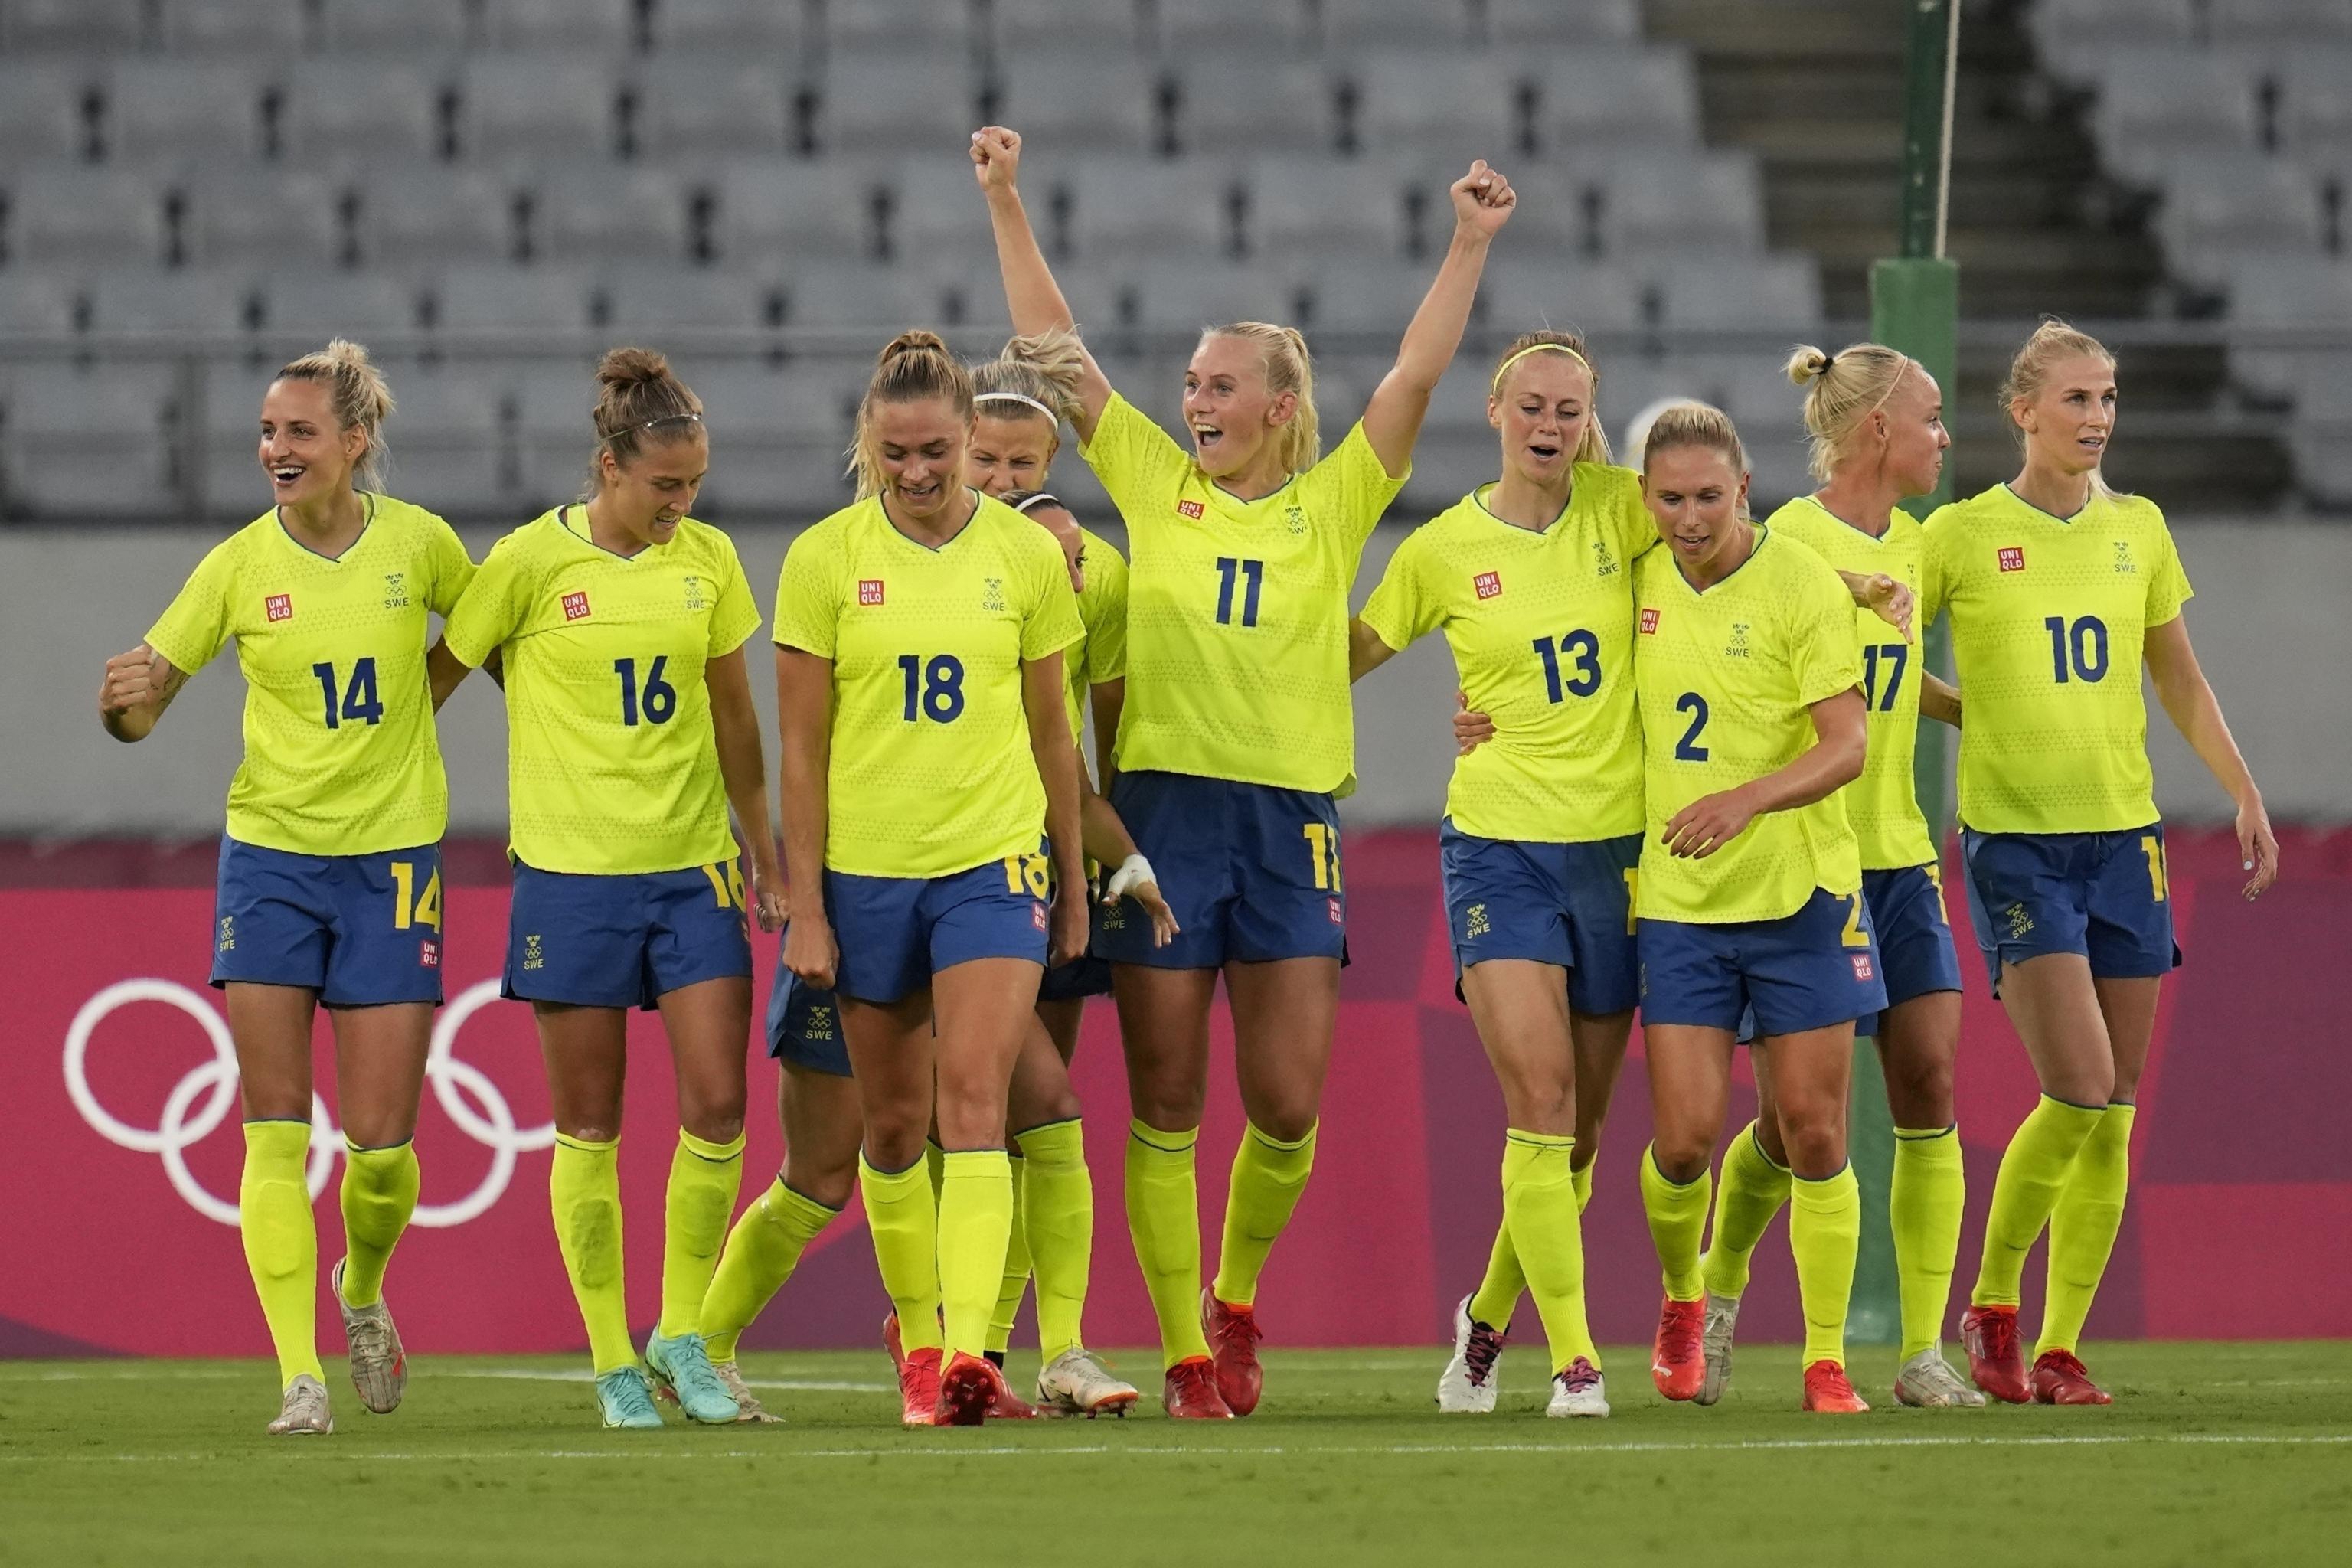 Olympic Soccer 2021 Uswnt S Stunning Loss To Sweden Headlines Day 1 Results Bleacher Report Latest News Videos And Highlights